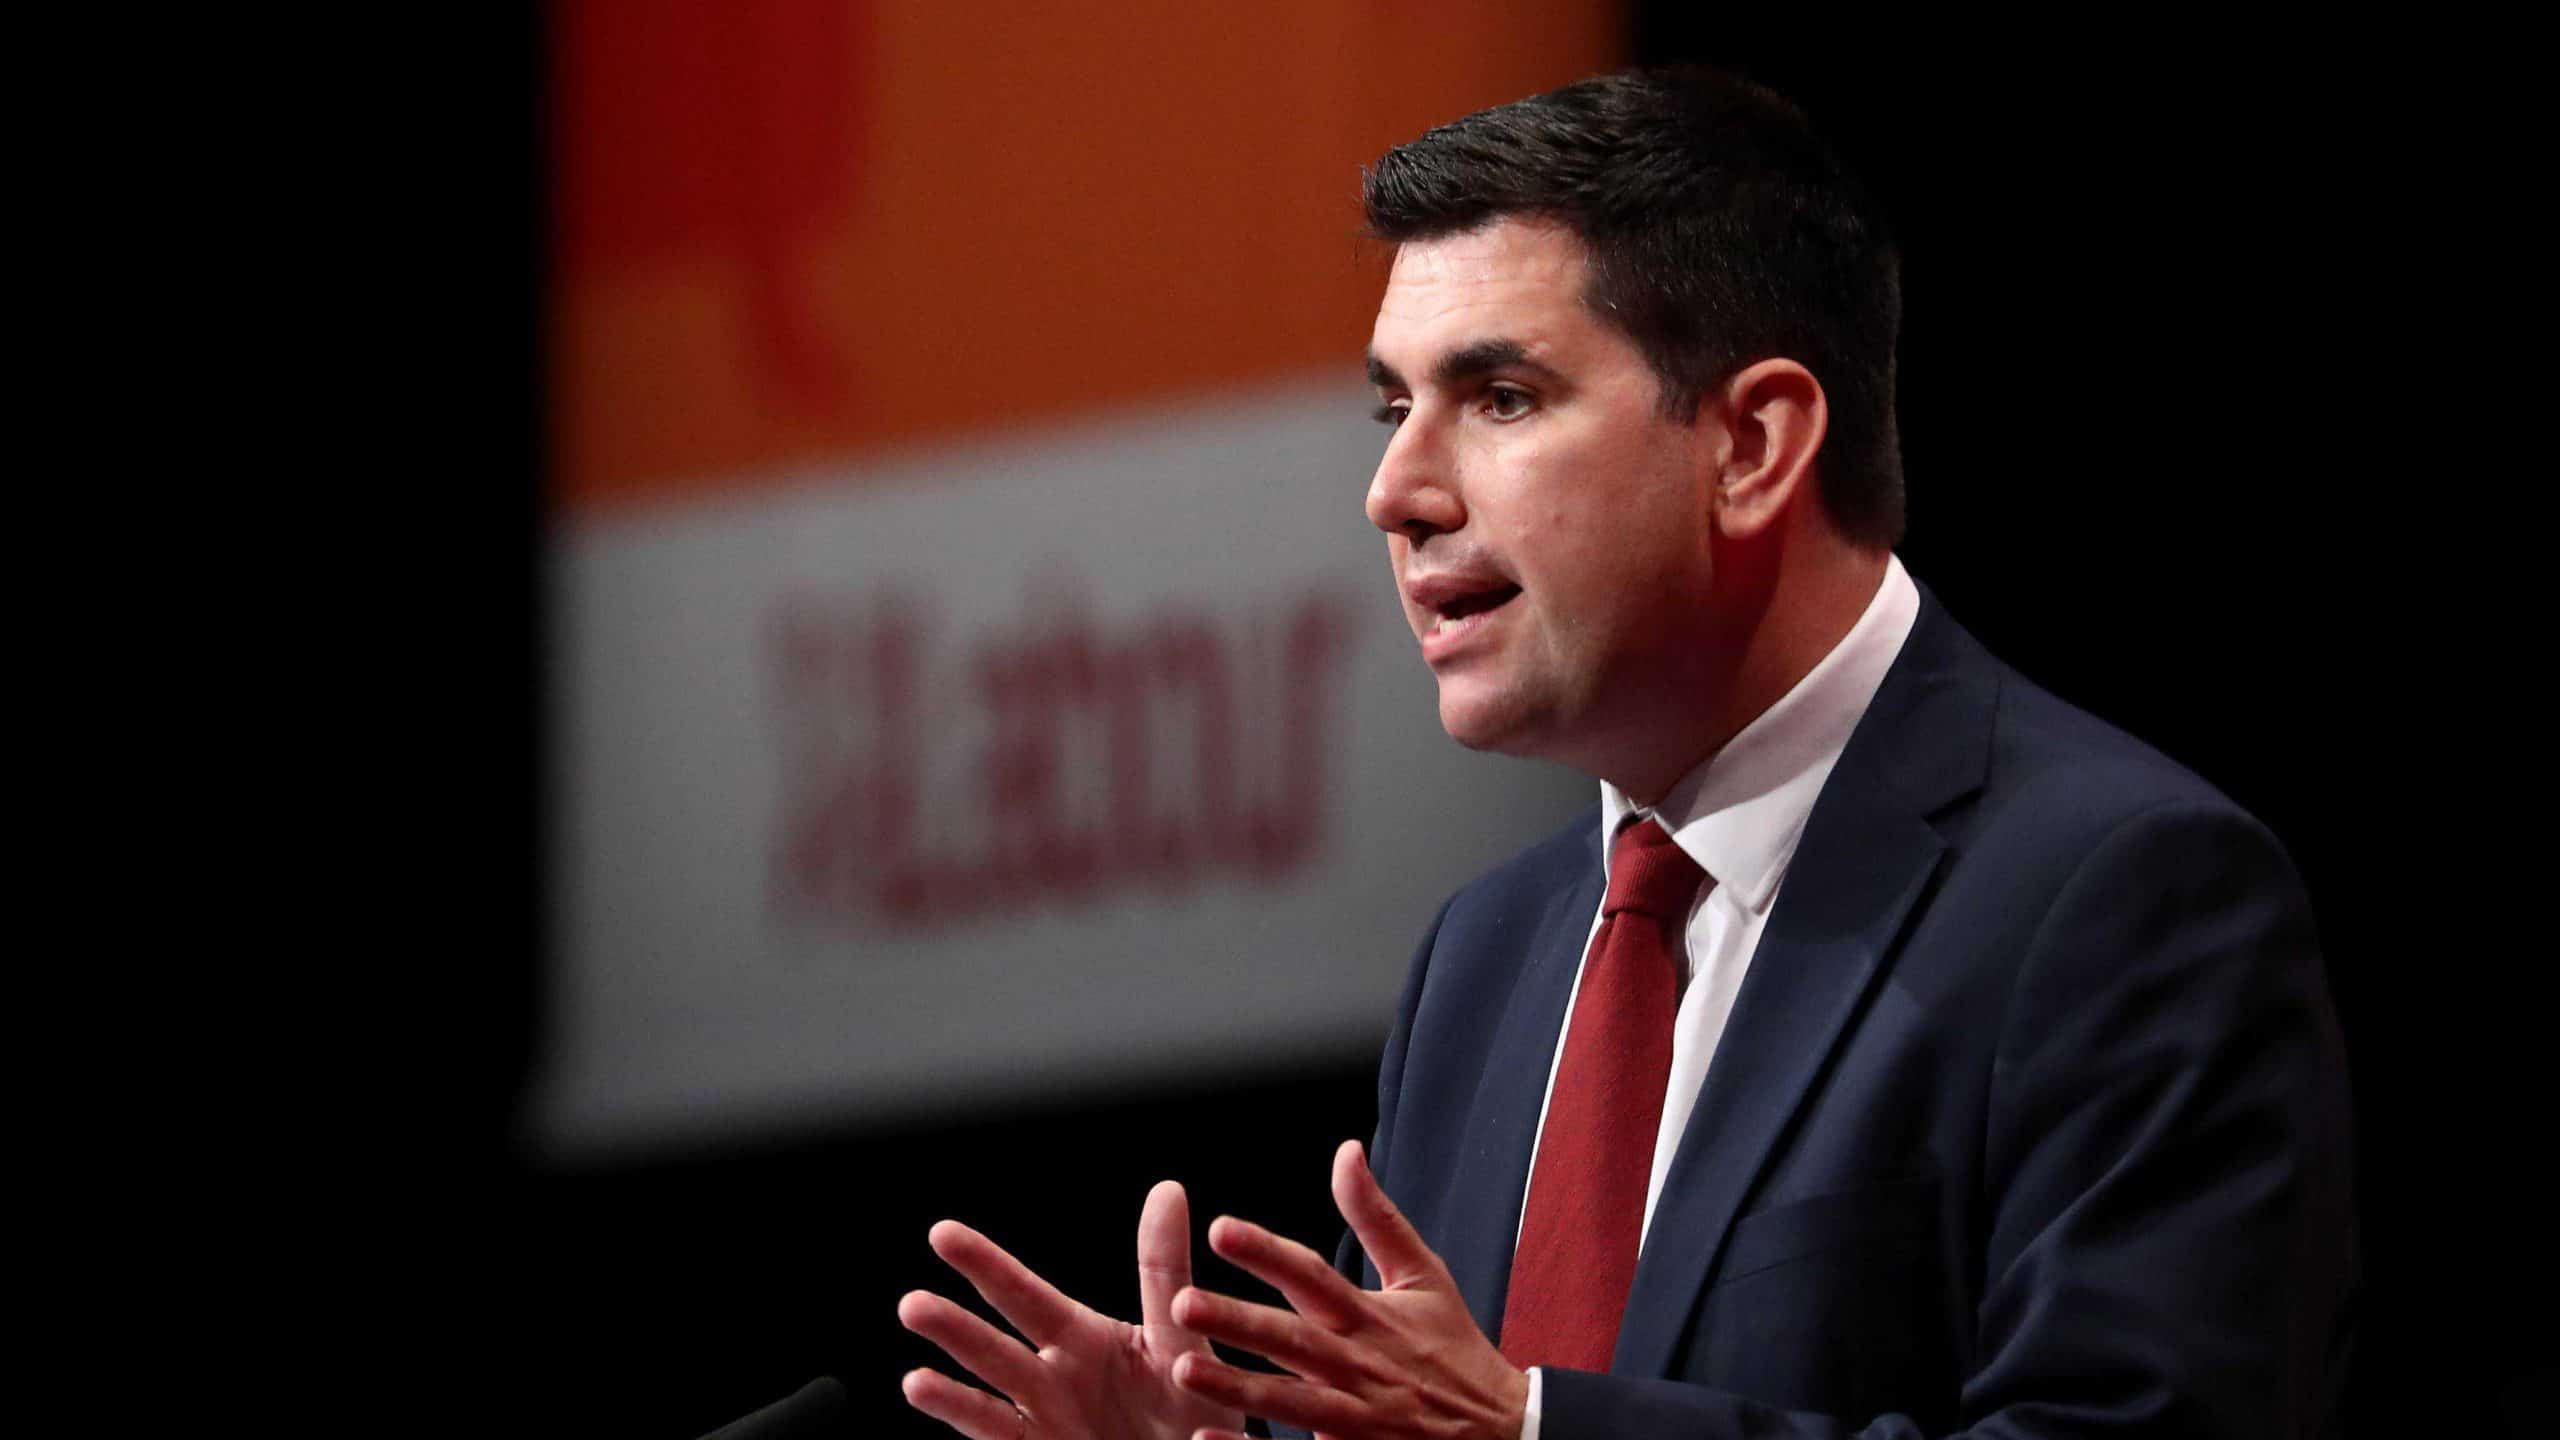 Labour apologises for hurt caused to the Jewish community